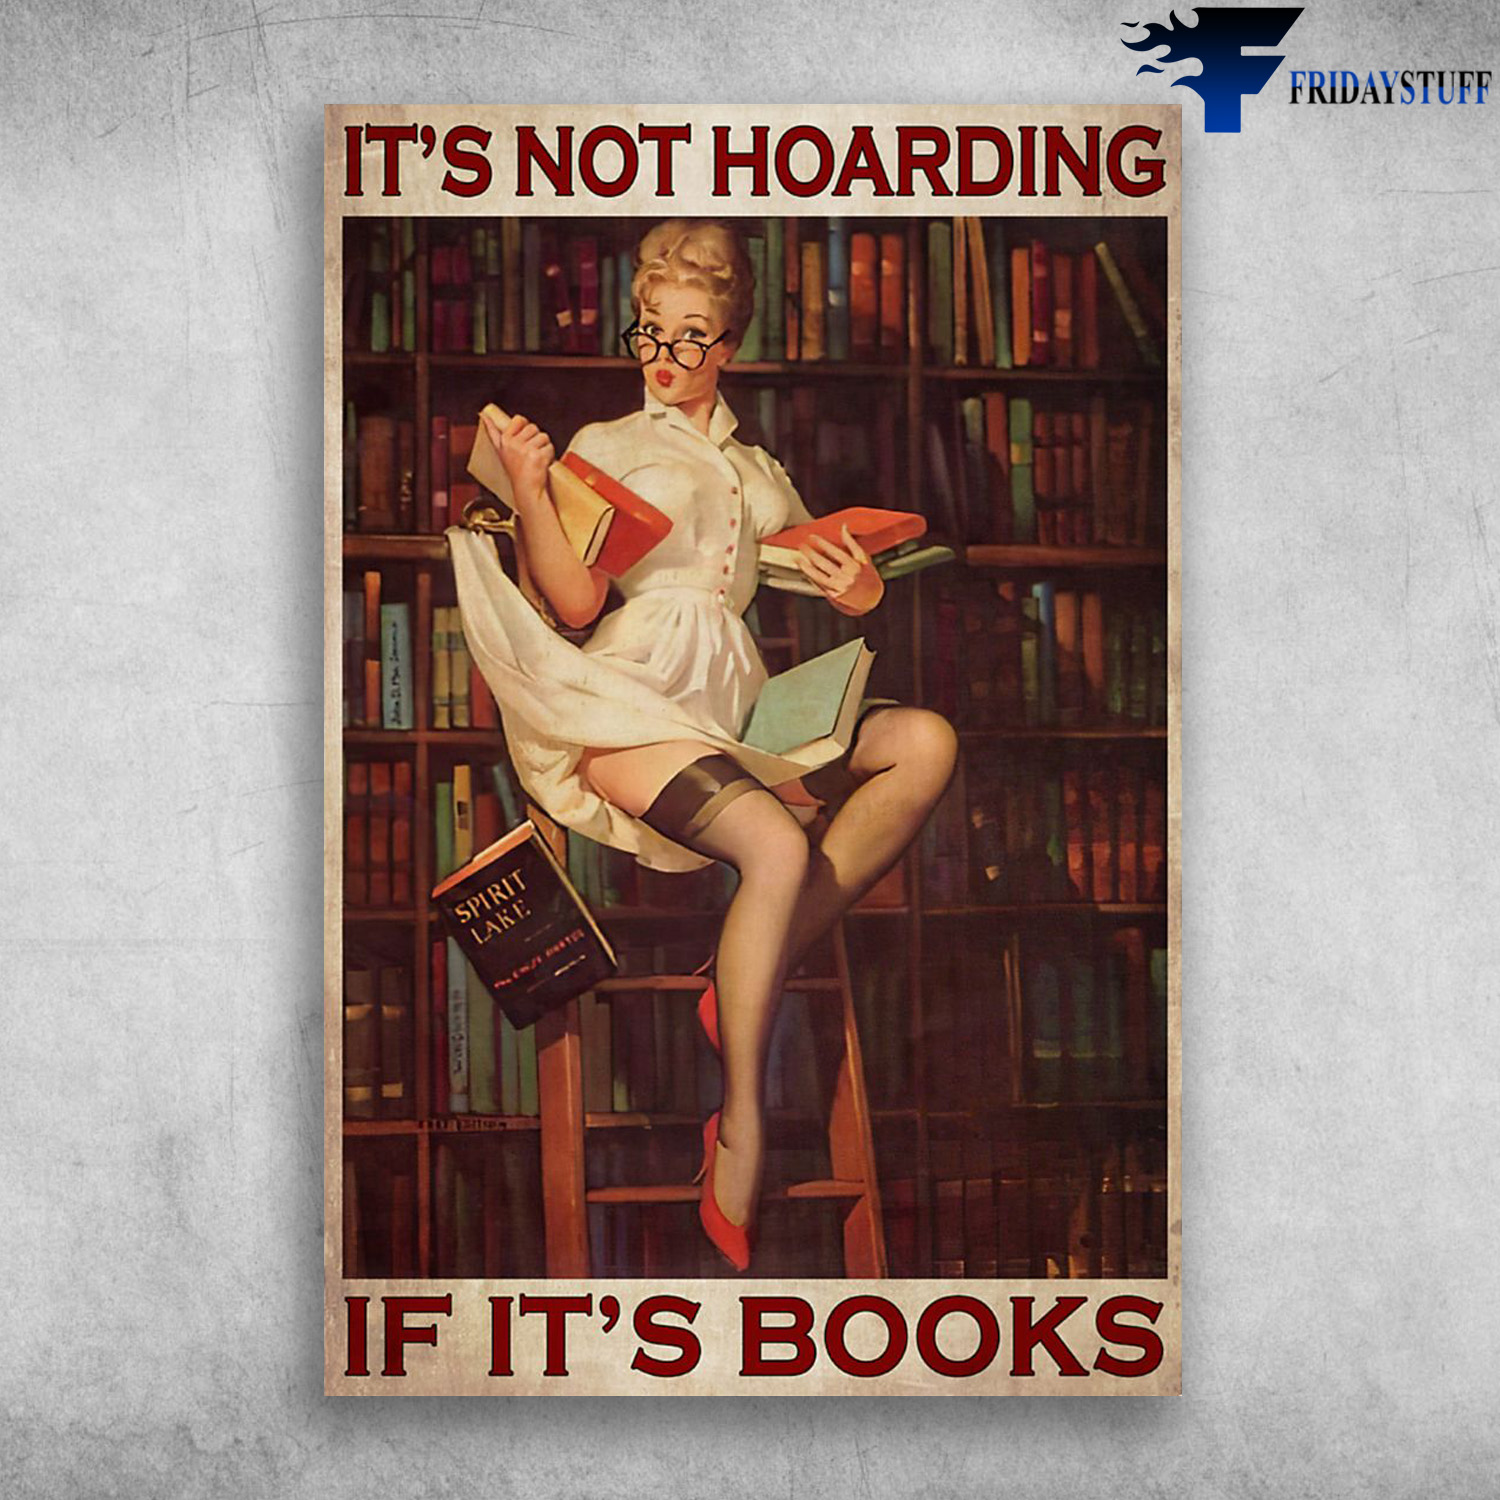 The Girl Reads Books - It's Not Hoarding, If It's Books